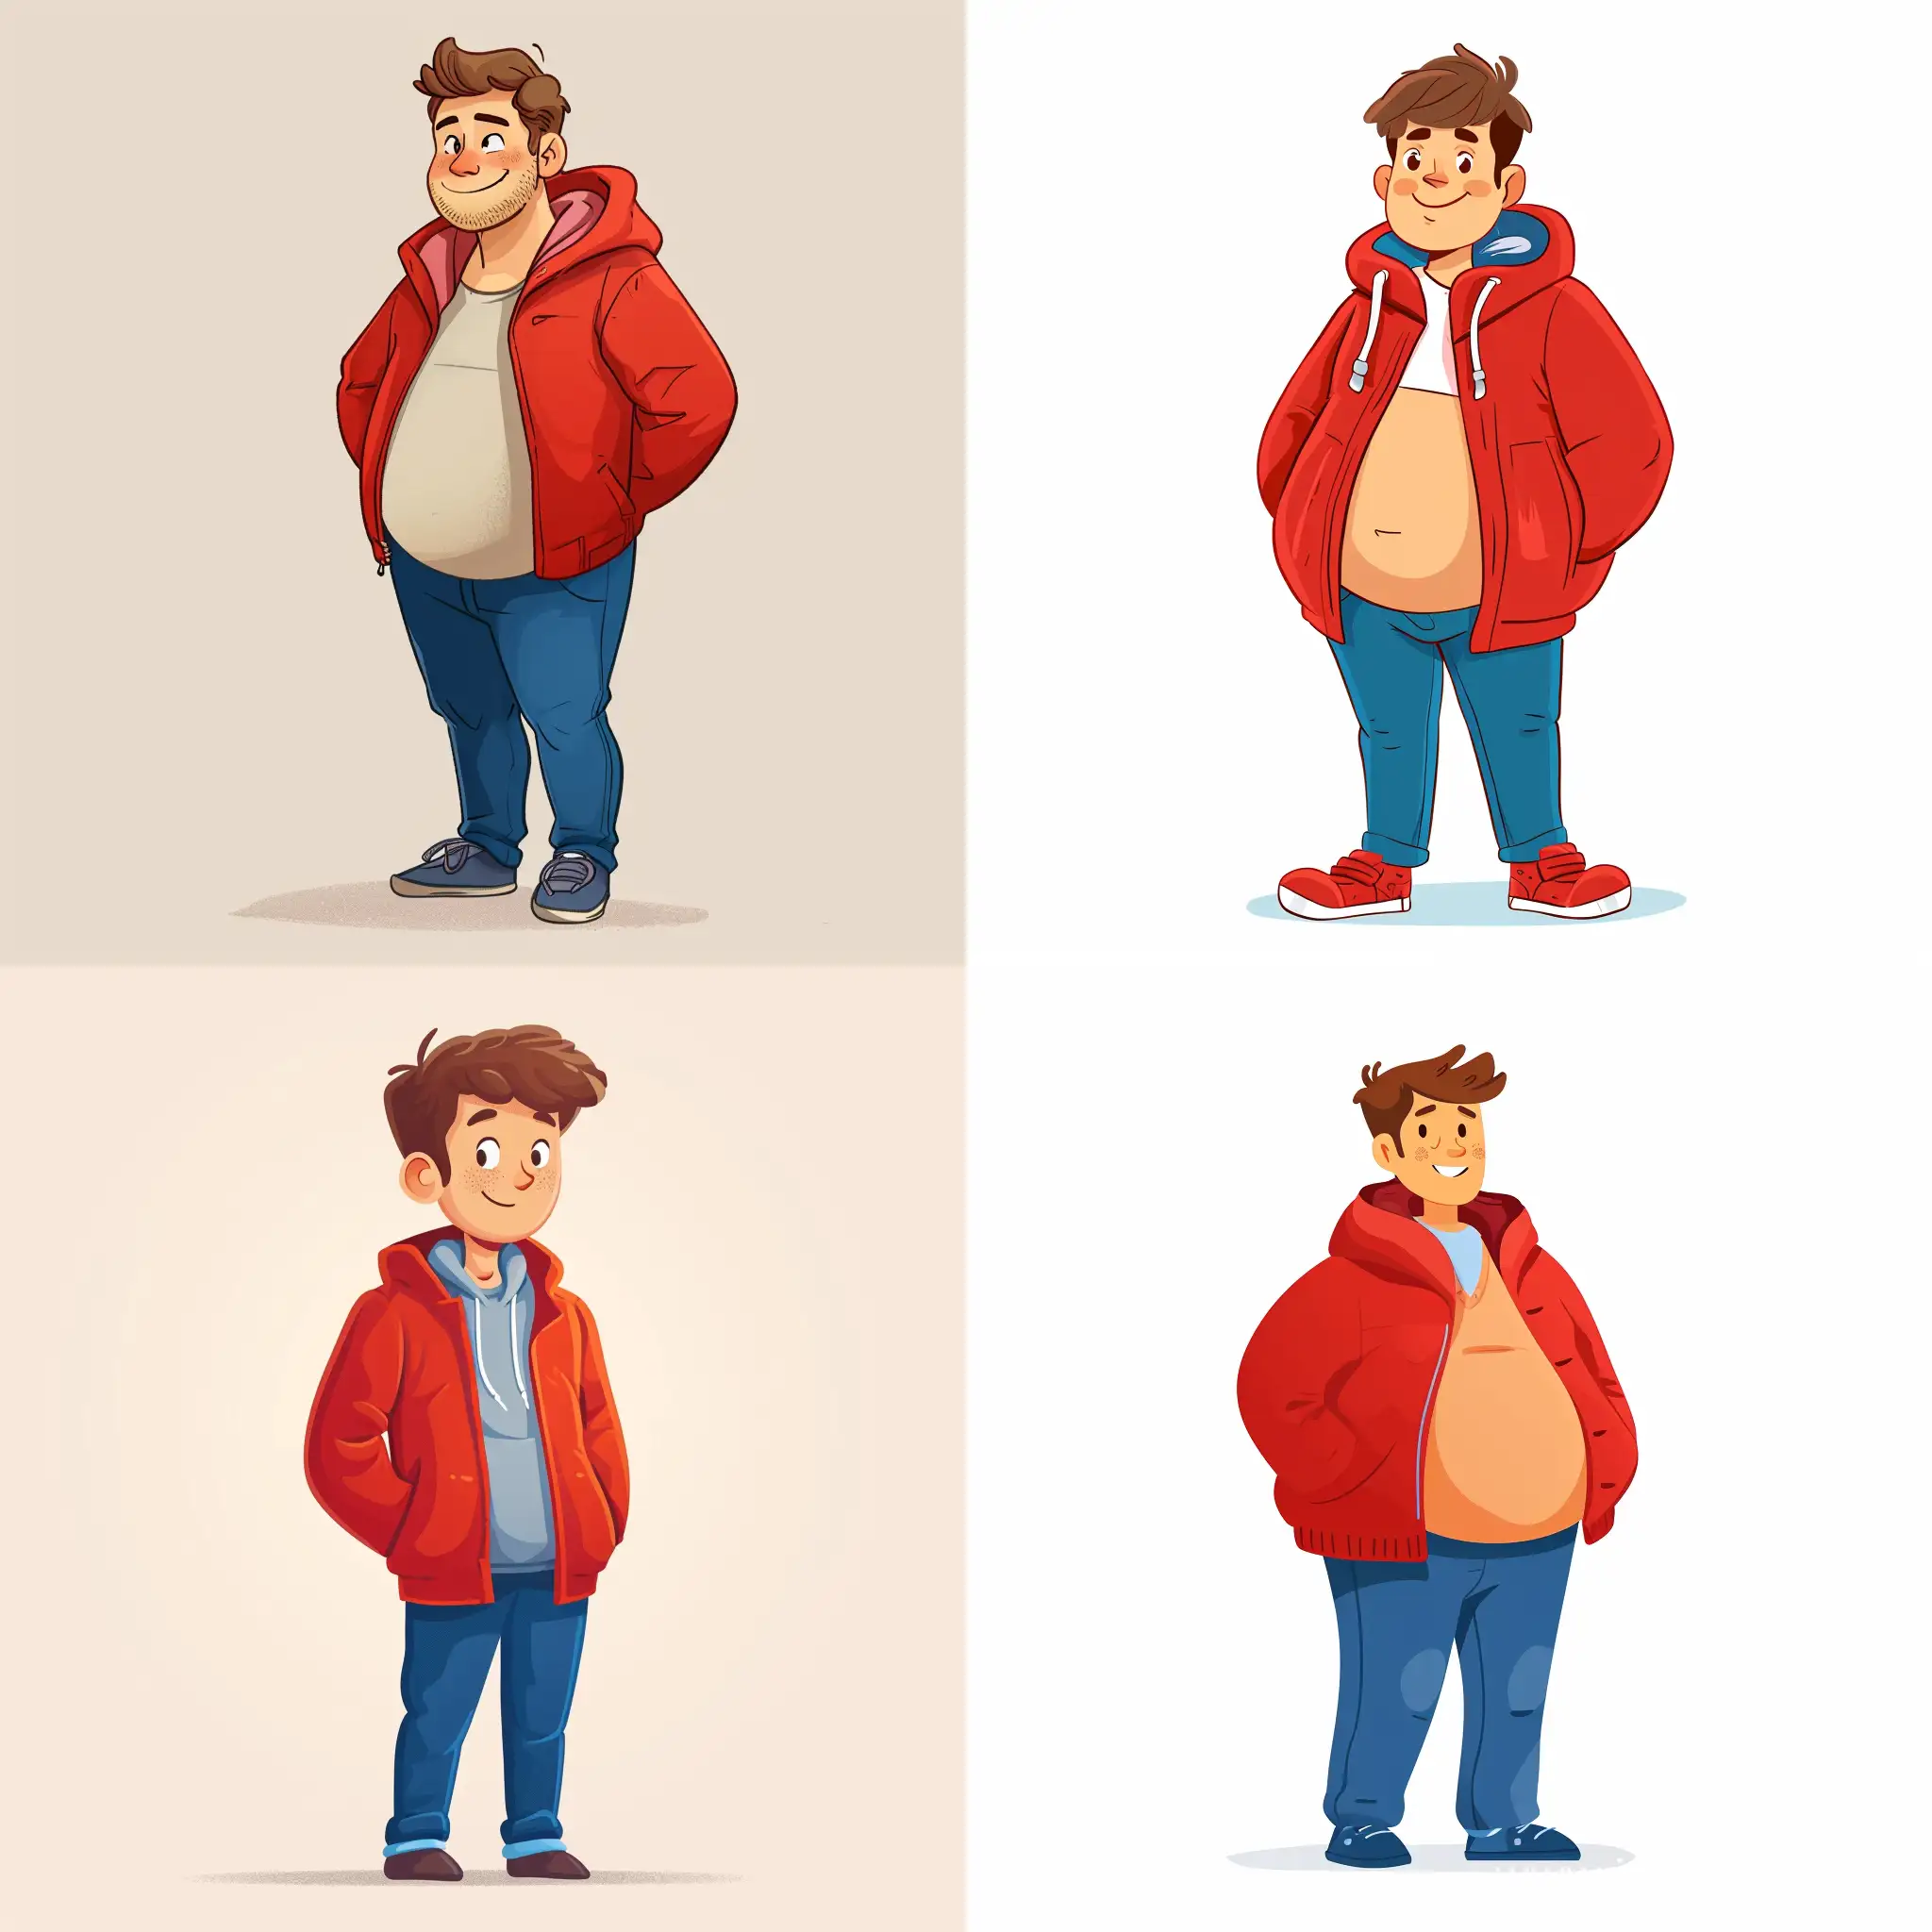 brunett A young man with a medium belly, not athletic, and a light beard, wearing a red jacket and blue pants,smiley,friendly,cute